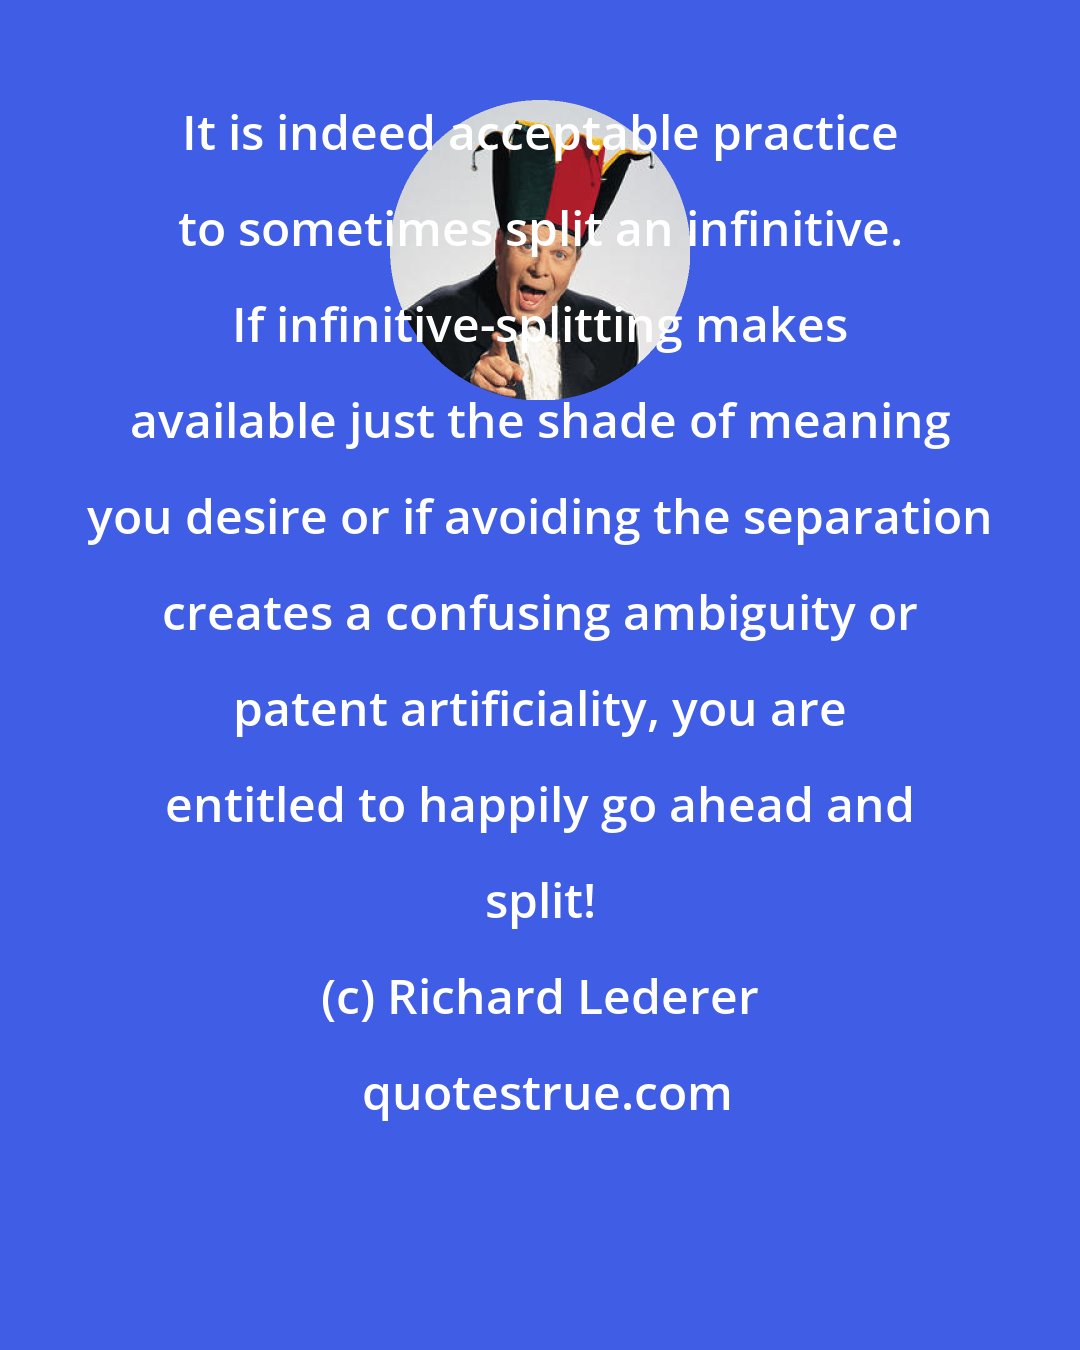 Richard Lederer: It is indeed acceptable practice to sometimes split an infinitive. If infinitive-splitting makes available just the shade of meaning you desire or if avoiding the separation creates a confusing ambiguity or patent artificiality, you are entitled to happily go ahead and split!